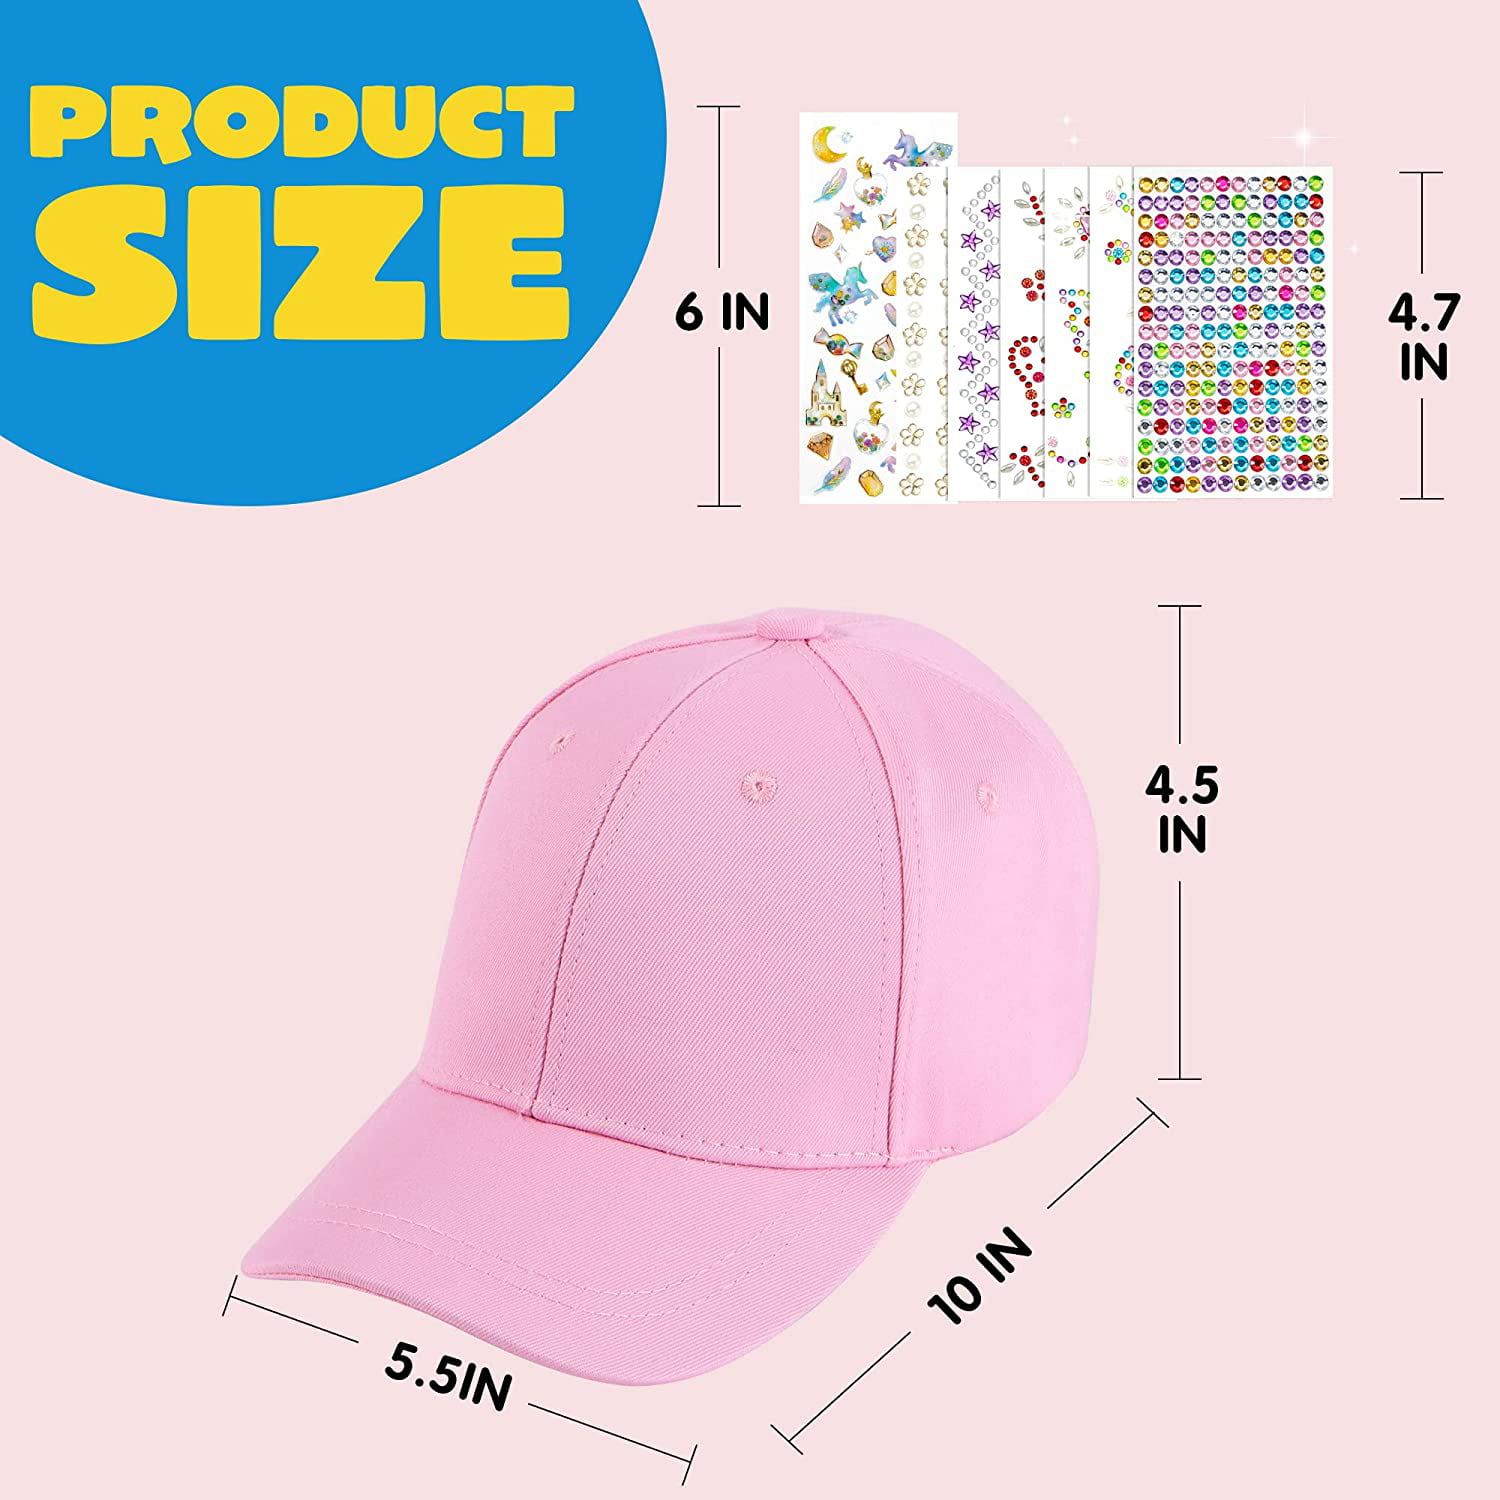 Gifts for Girls Decorate Your Own Baseball Cap with Unicorns Gems Stickers,  Arts and Crafts for Kids ages 4-12, Fun Creative DIY Arts & Crafts for